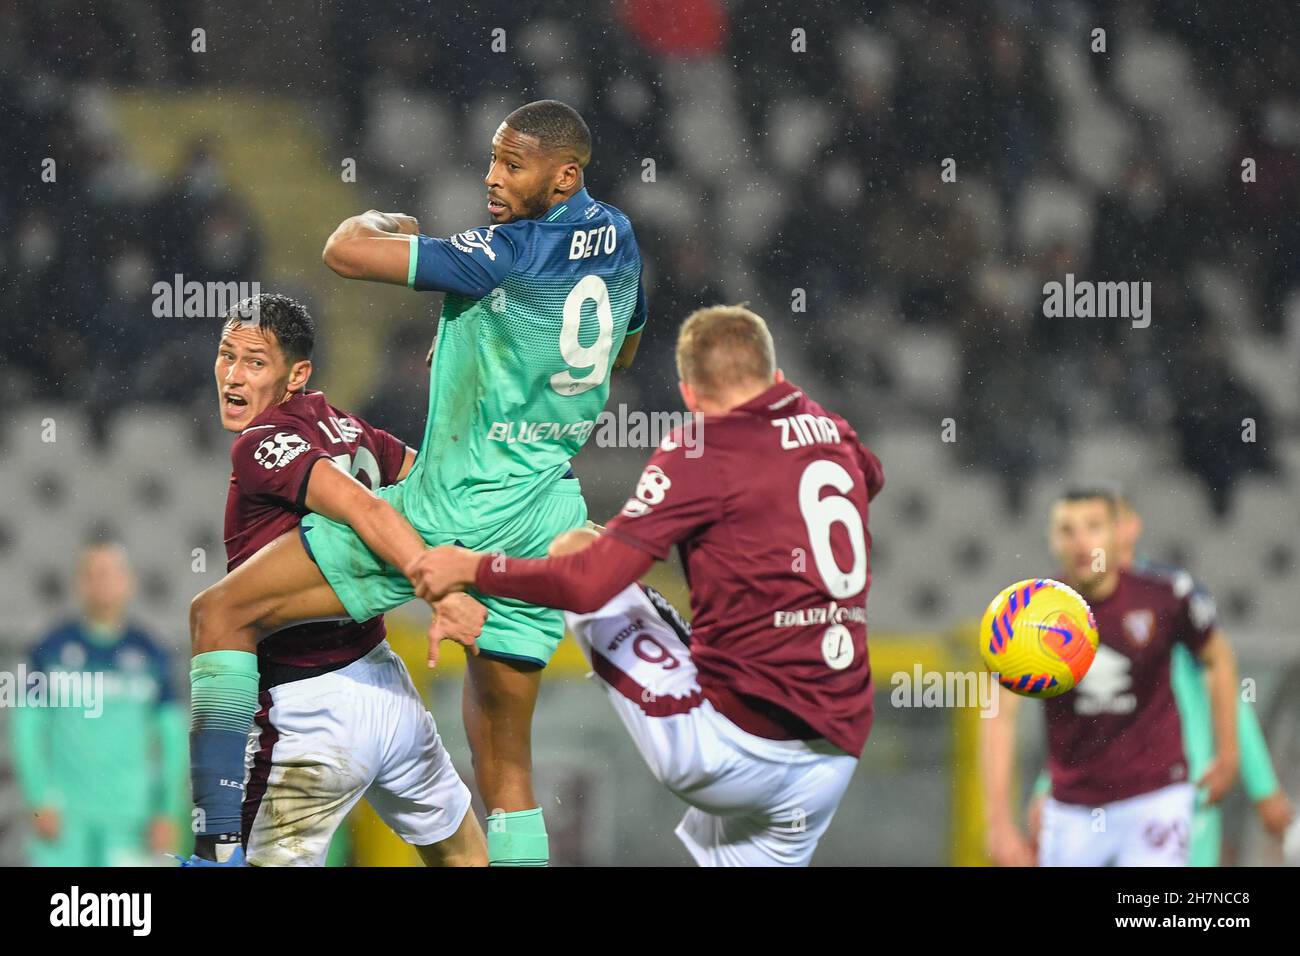 Torino, Italy. 22nd, November 2021. Beto (9) of Udinese seen in the Serie A match between Torino and Udinese at Stadio Olimpico in Torino. (Photo credit: Gonzales Photo - Tommaso Fimiano). Stock Photo